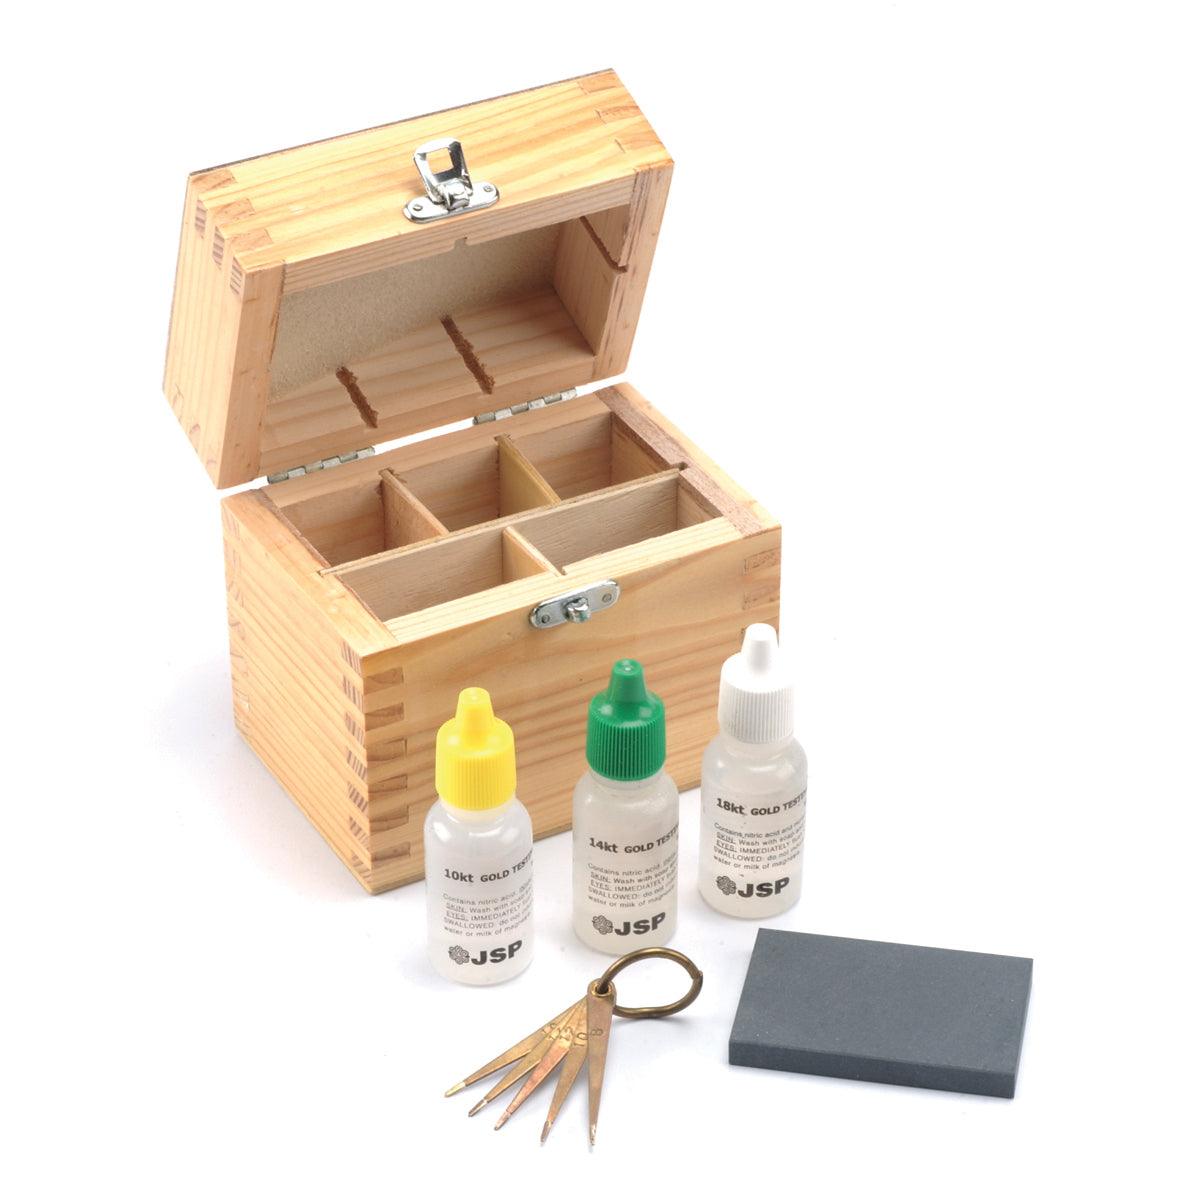 Check gold with Jewelry Test Kit. Where to buy Kit acids and touchstone. 